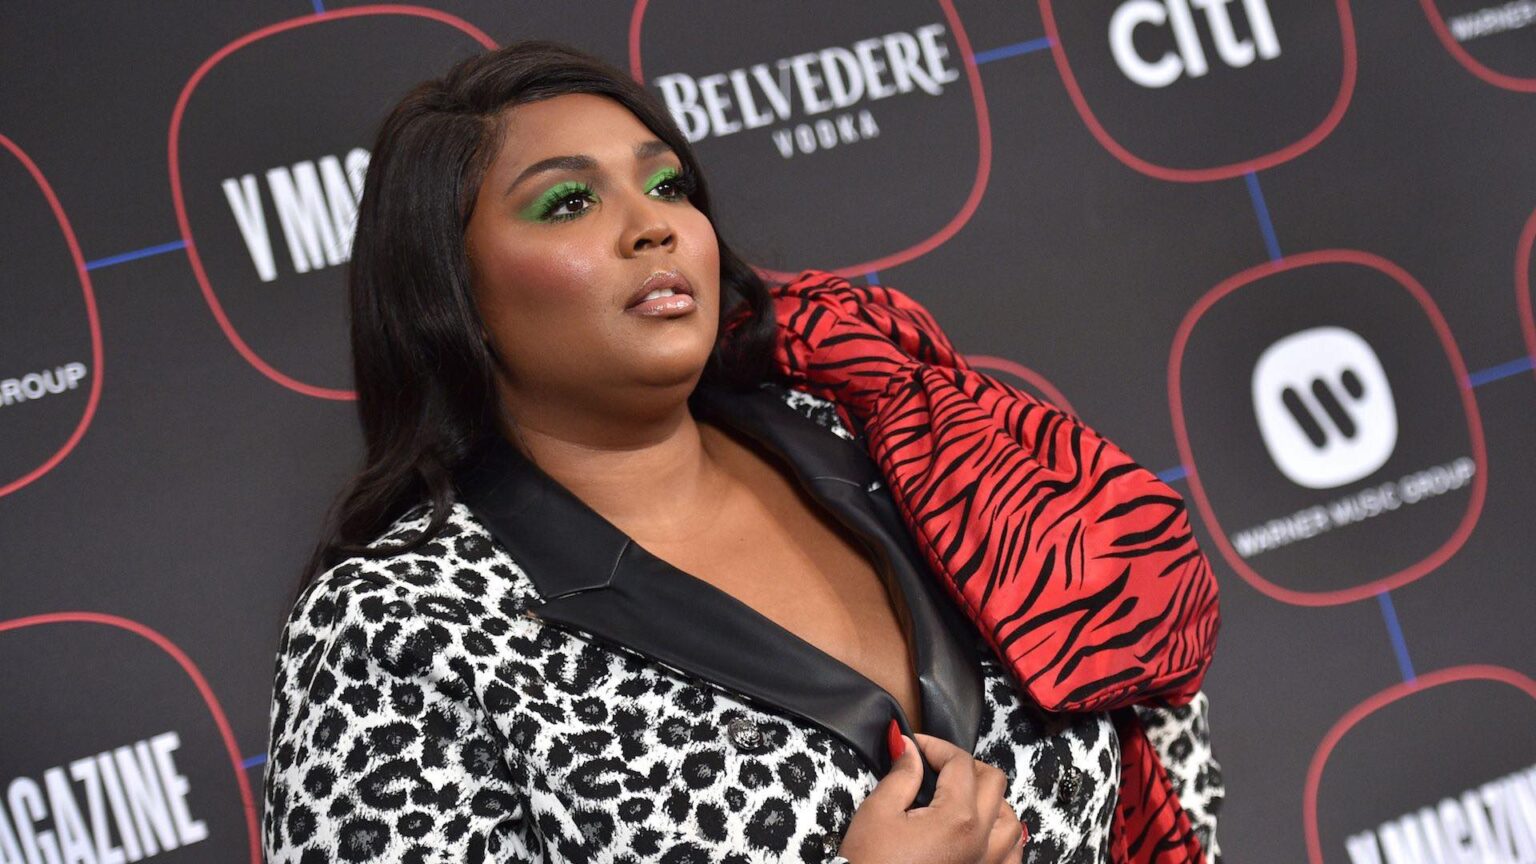 The Lizzo buzz this month doesn't seem to be stopping any time soon. Bust open the latest story from the star making Twitter fill up with Lizzo memes.